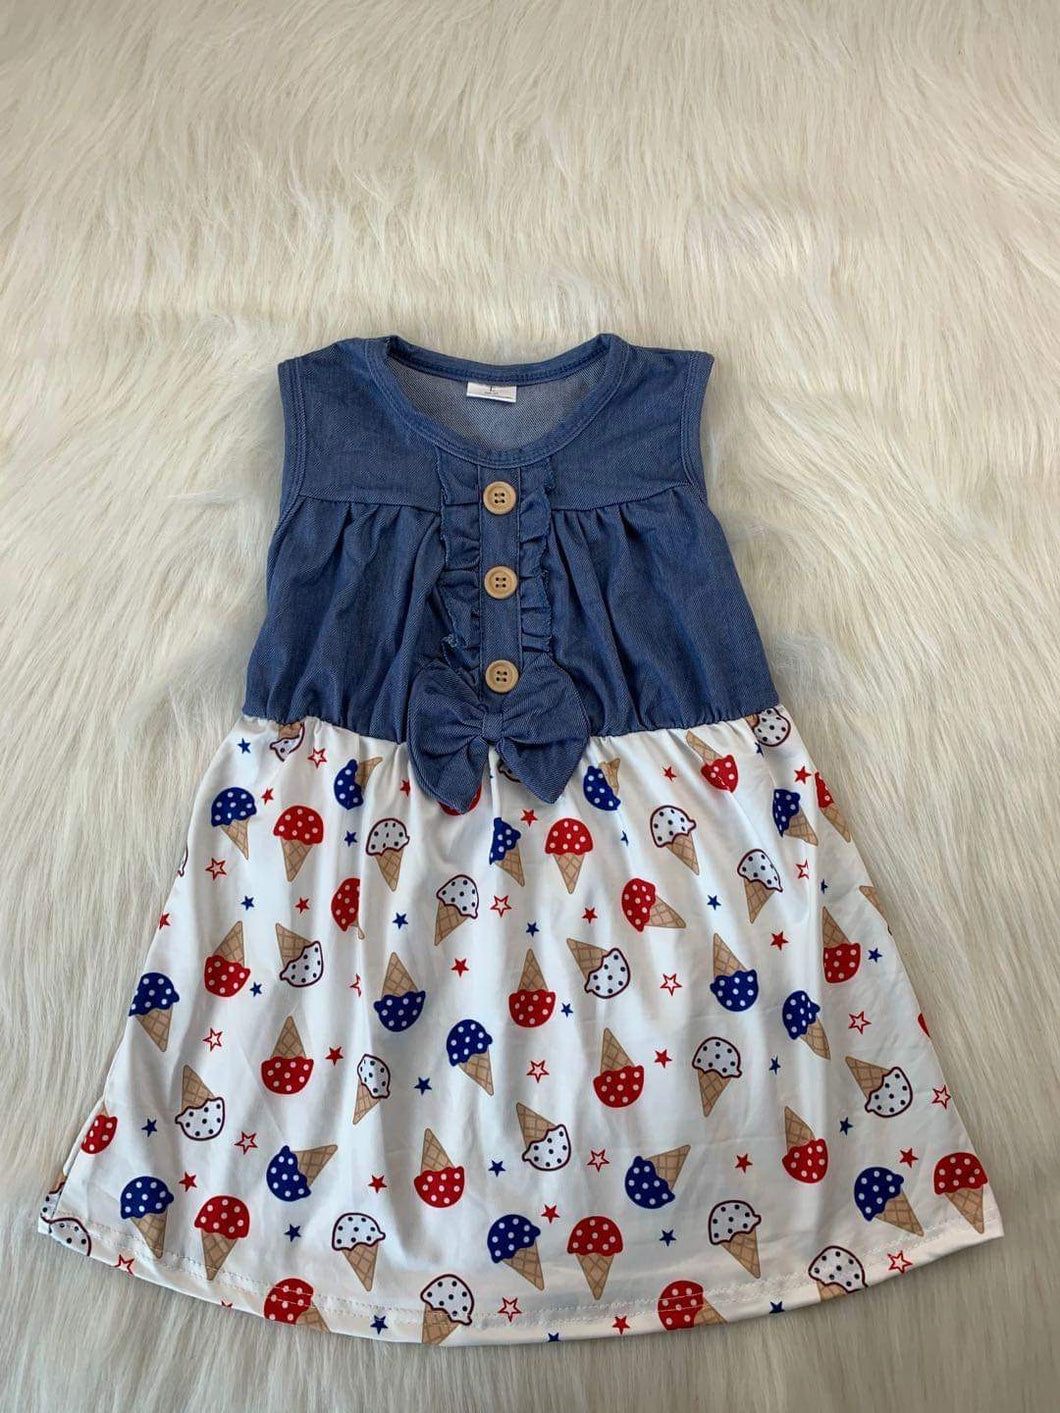 Red, White, and Blue Ice Cream Dress